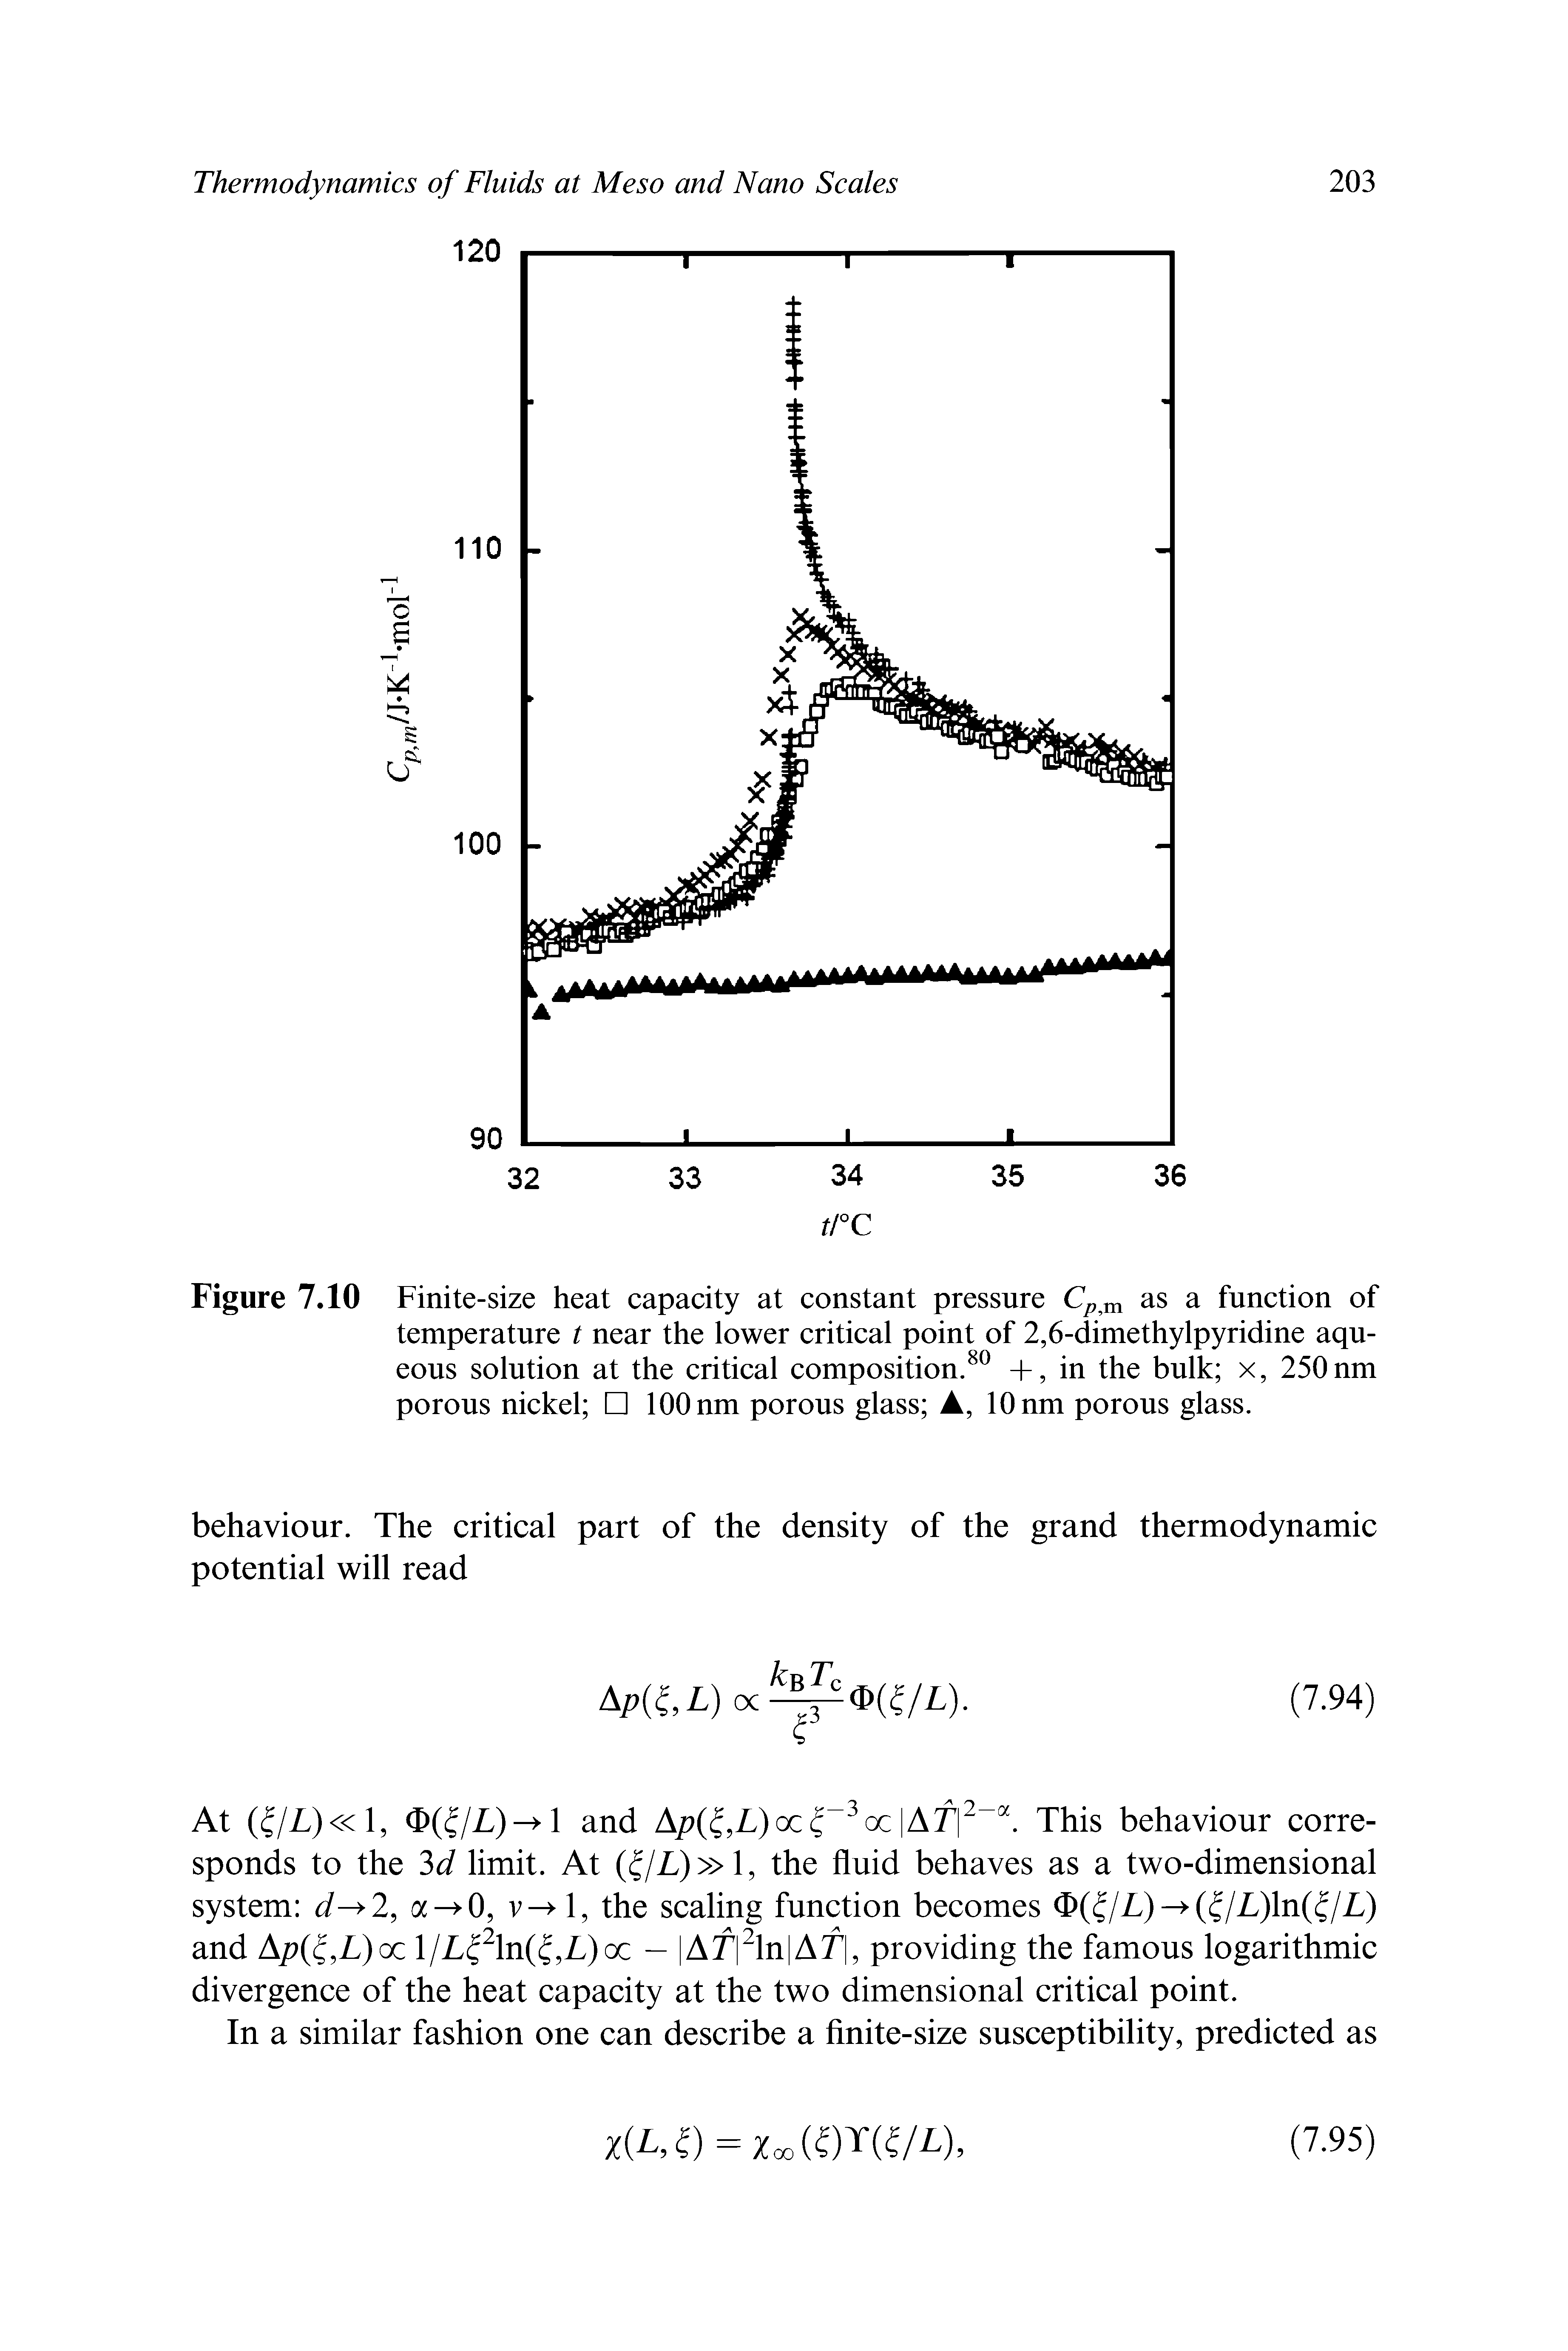 Figure 7.10 Finite-size heat capacity at constant pressure as a function of temperature t near the lower critical point of 2,6-dimethylpyridine aqueous solution at the critical composition. +, in the bulk x, 250 nm porous nickel 100 nm porous glass , lOnm porous glass.